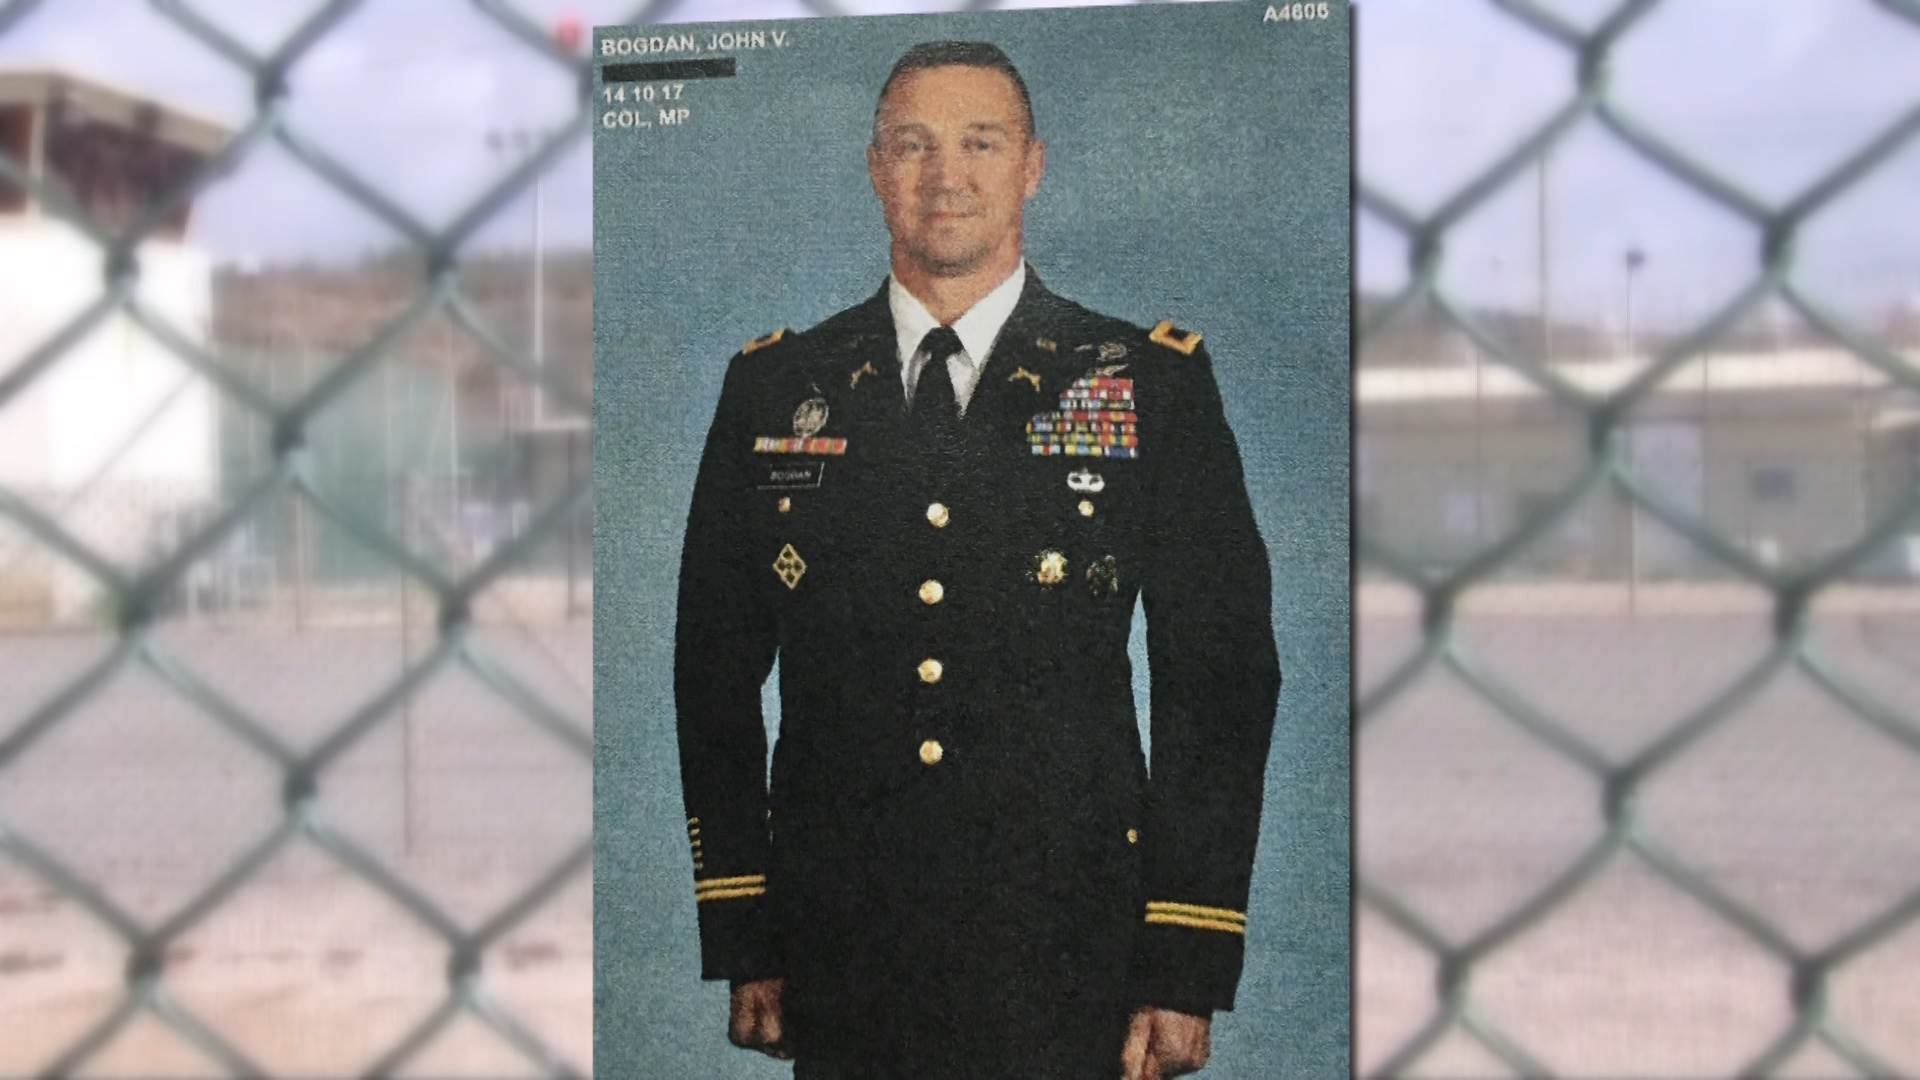 John Bodgan's command of the Guantanamo Bay military prison came under fire years ago for possible human and civil rights violations. Now, he works at UNC Charlotte.